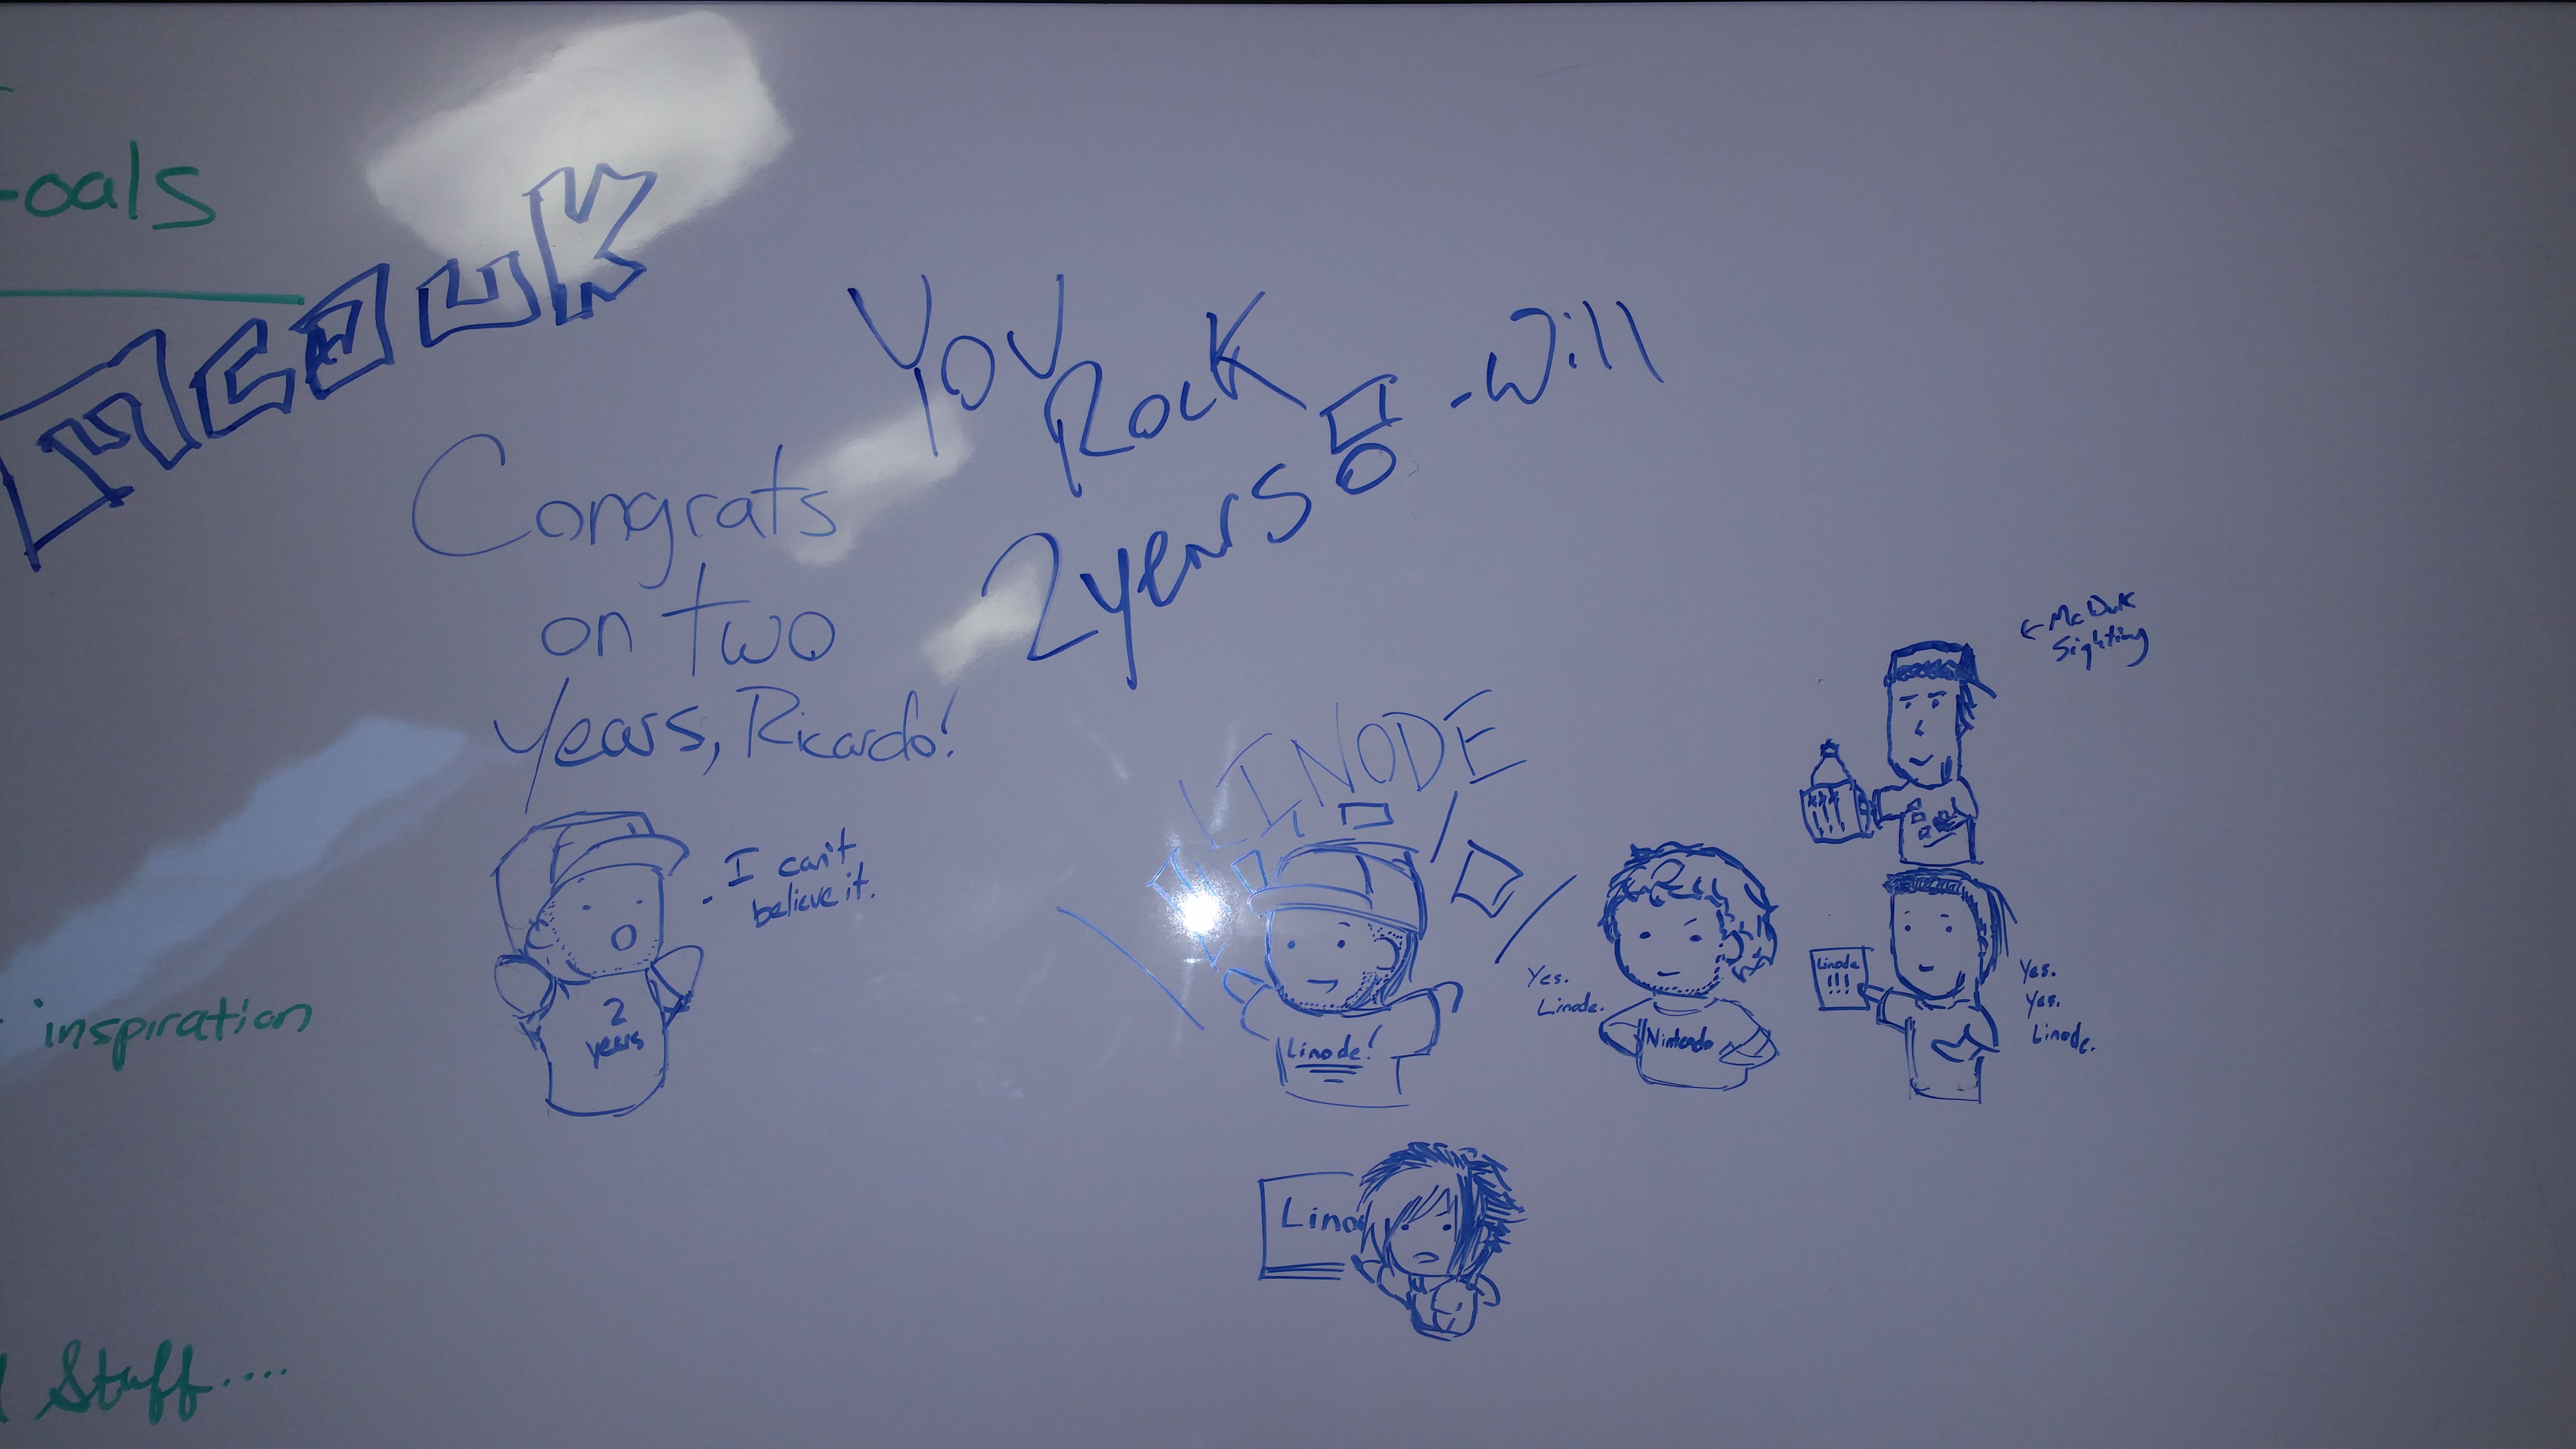 Messages from my co-workers for my 2-year anniversary at Linode.